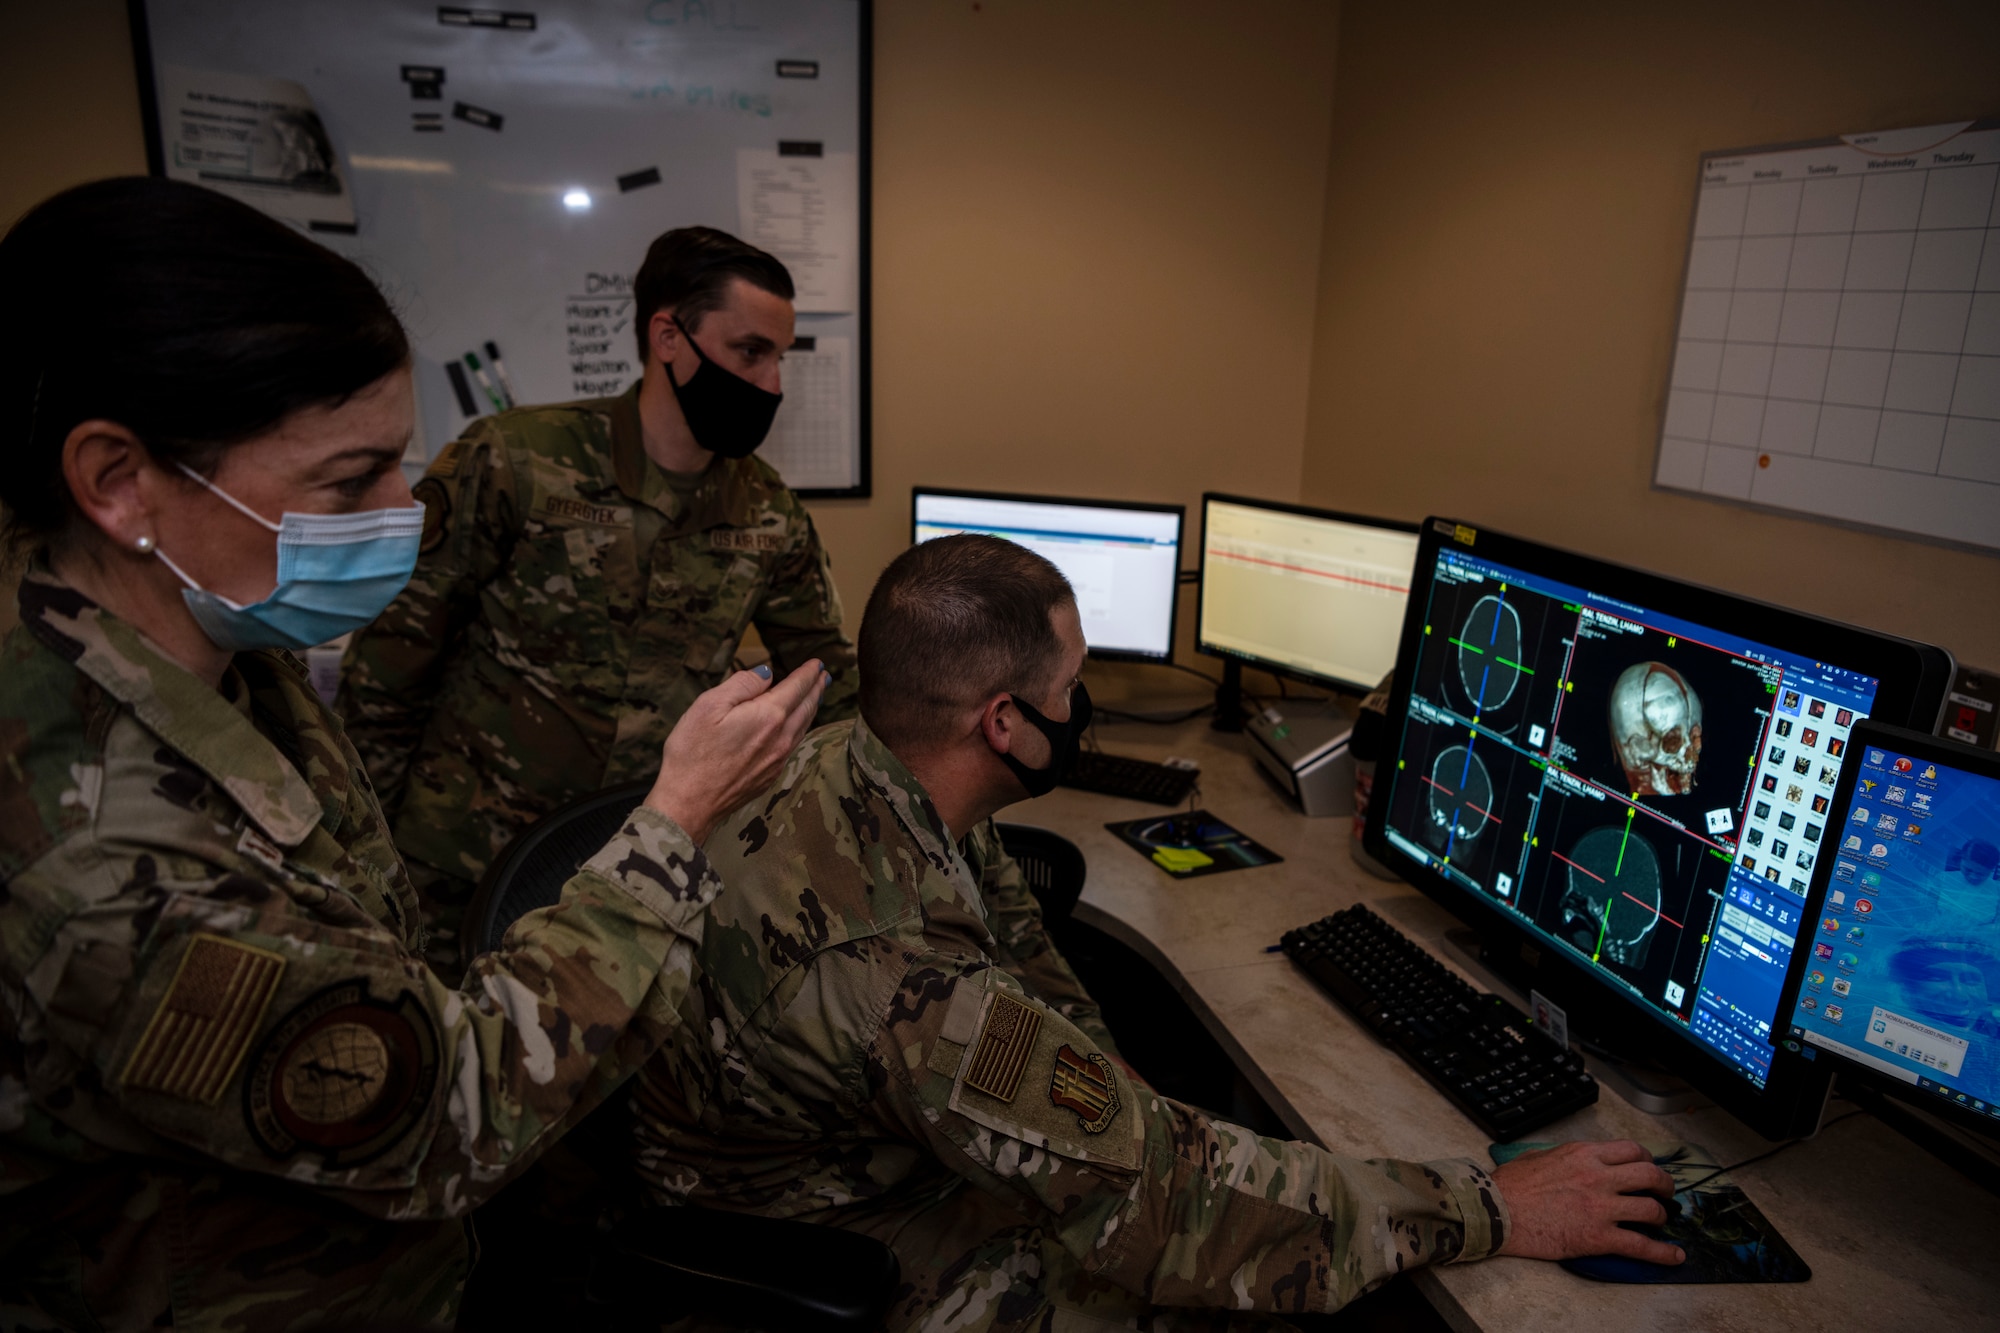 Airmen show other Airmen with higher rank images on the computer.